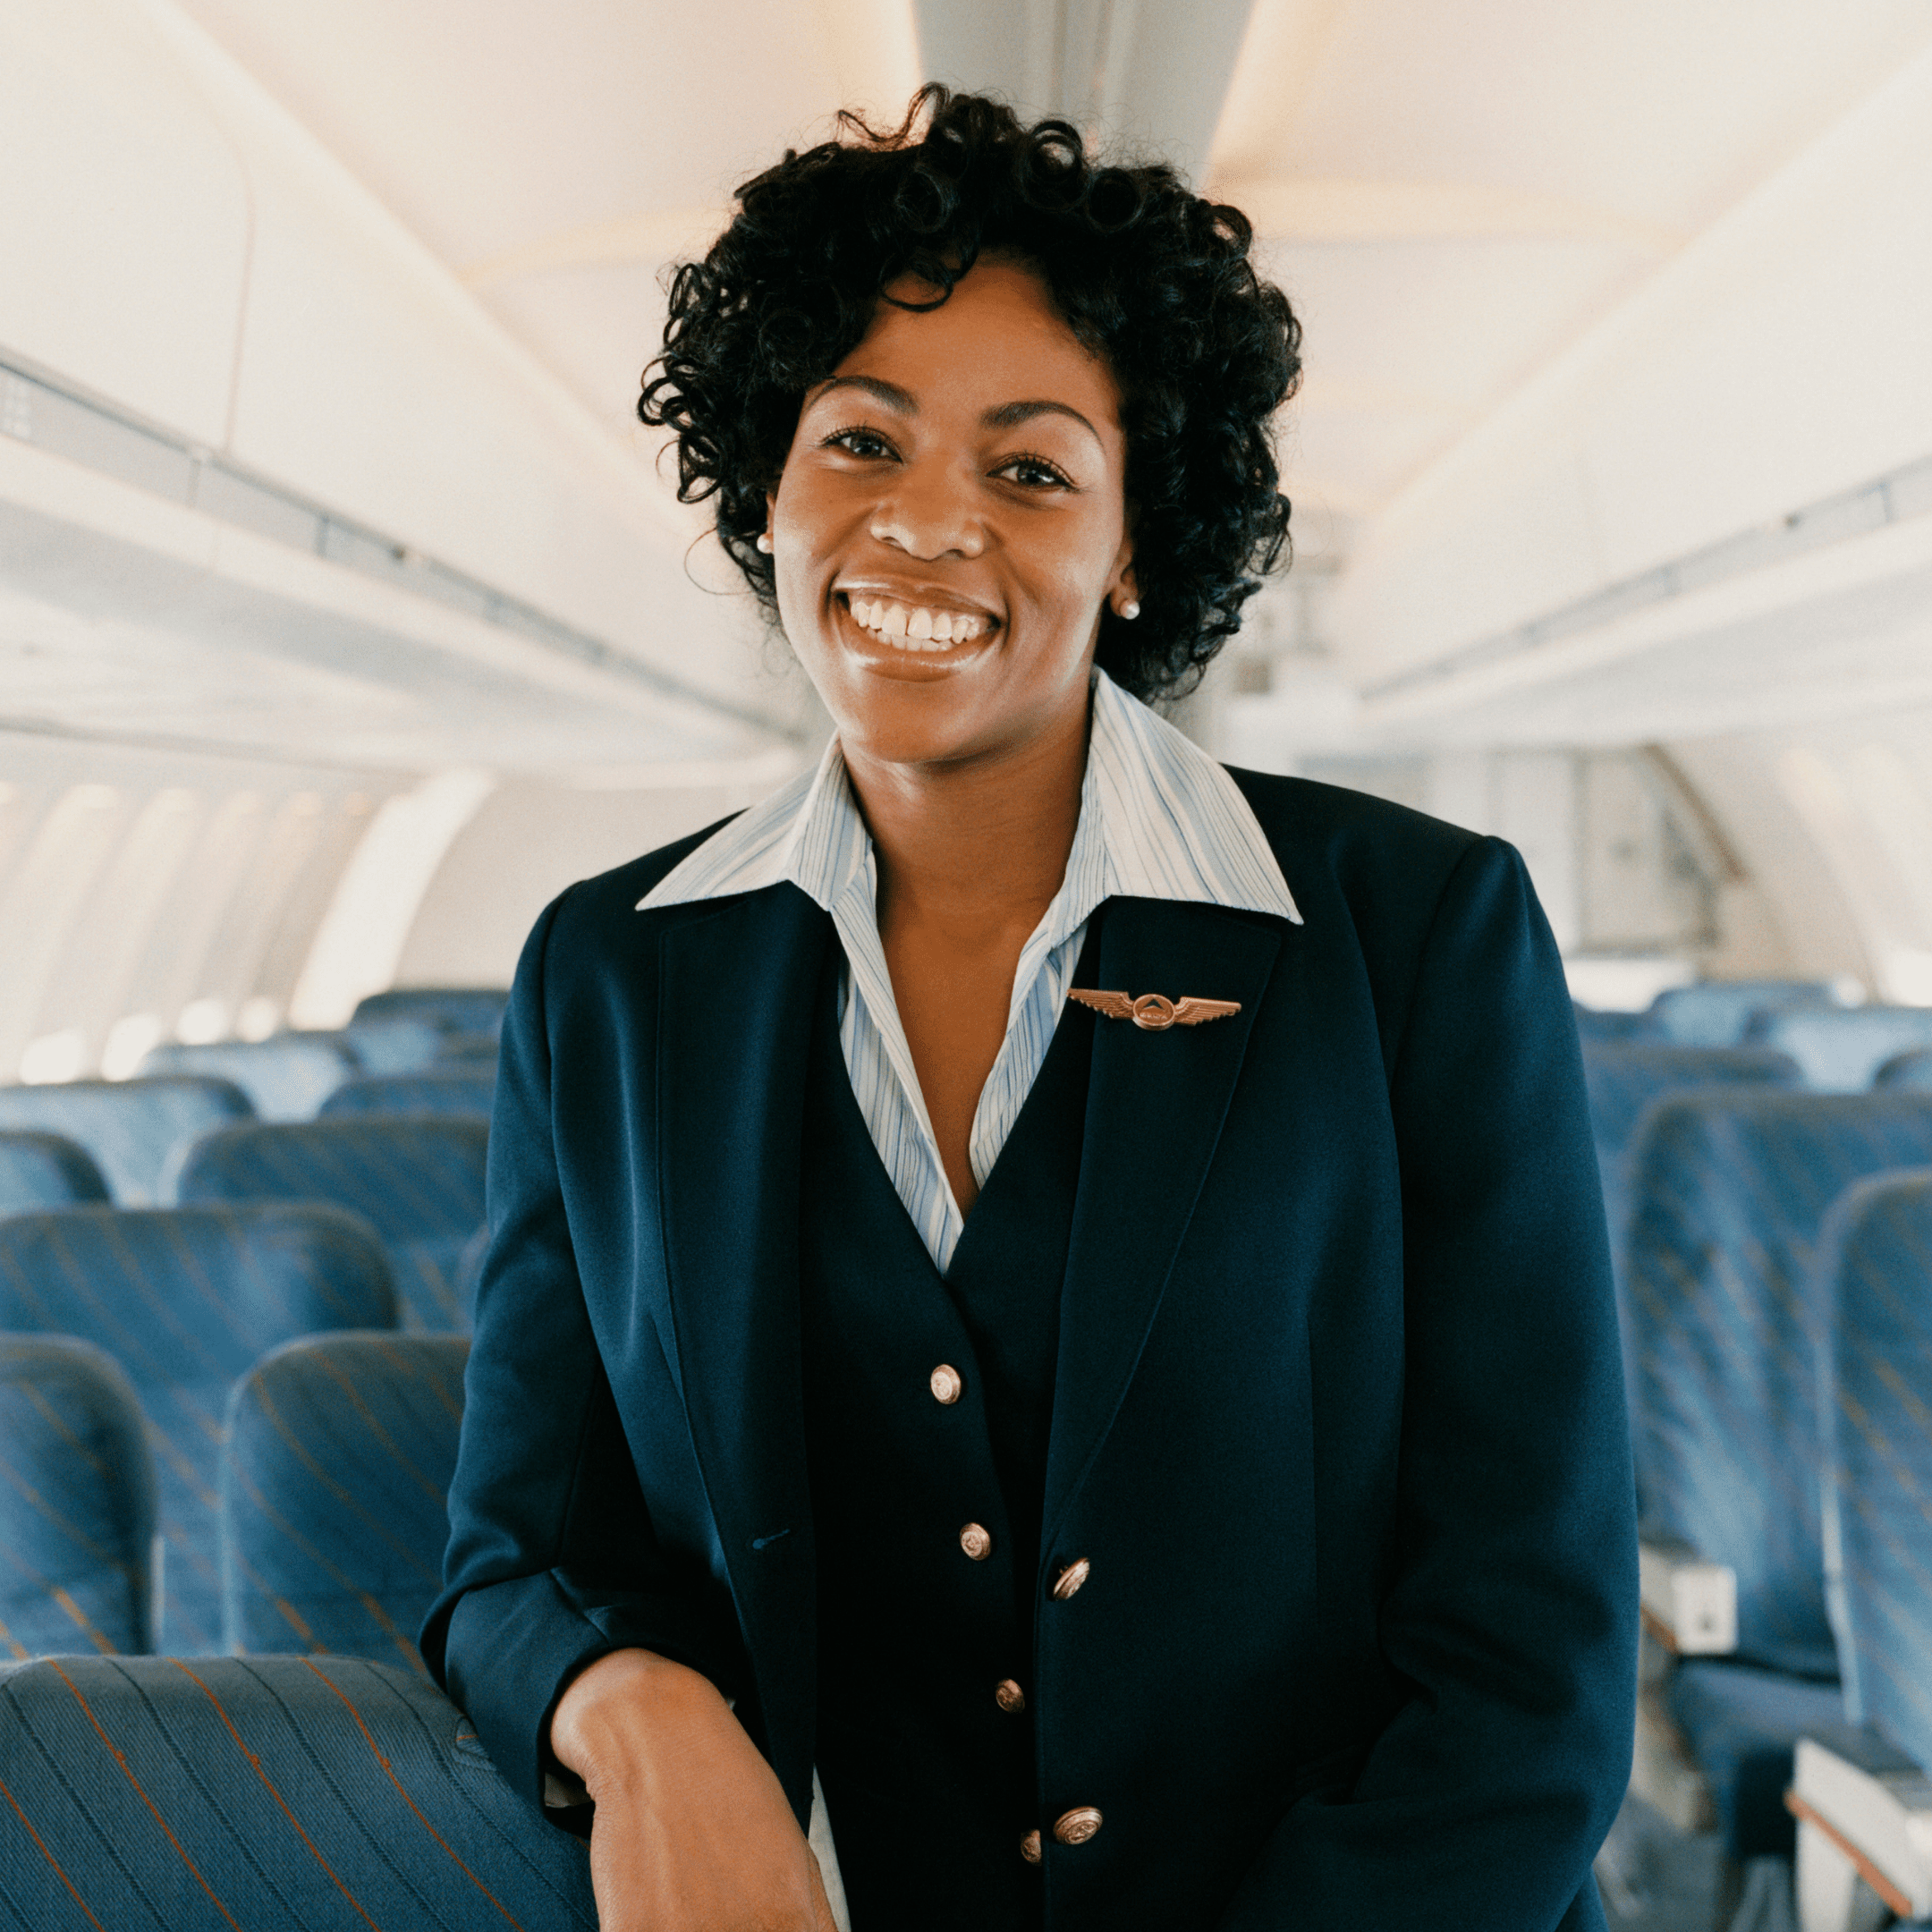 Tattoo policy for flight attendants